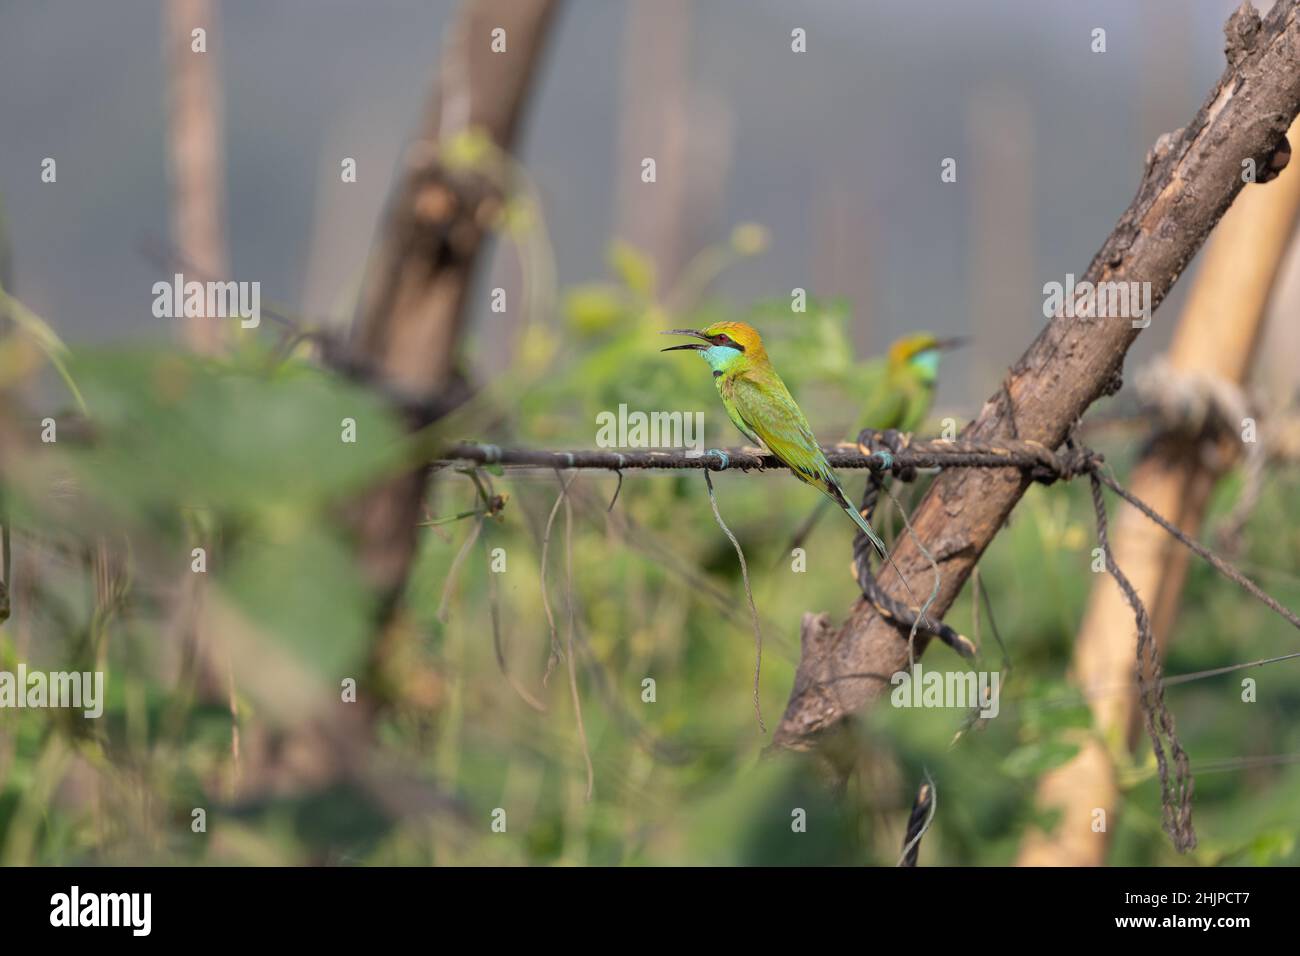 Asian Green Bee eater bird perched on a wooden log in habitat Stock Photo